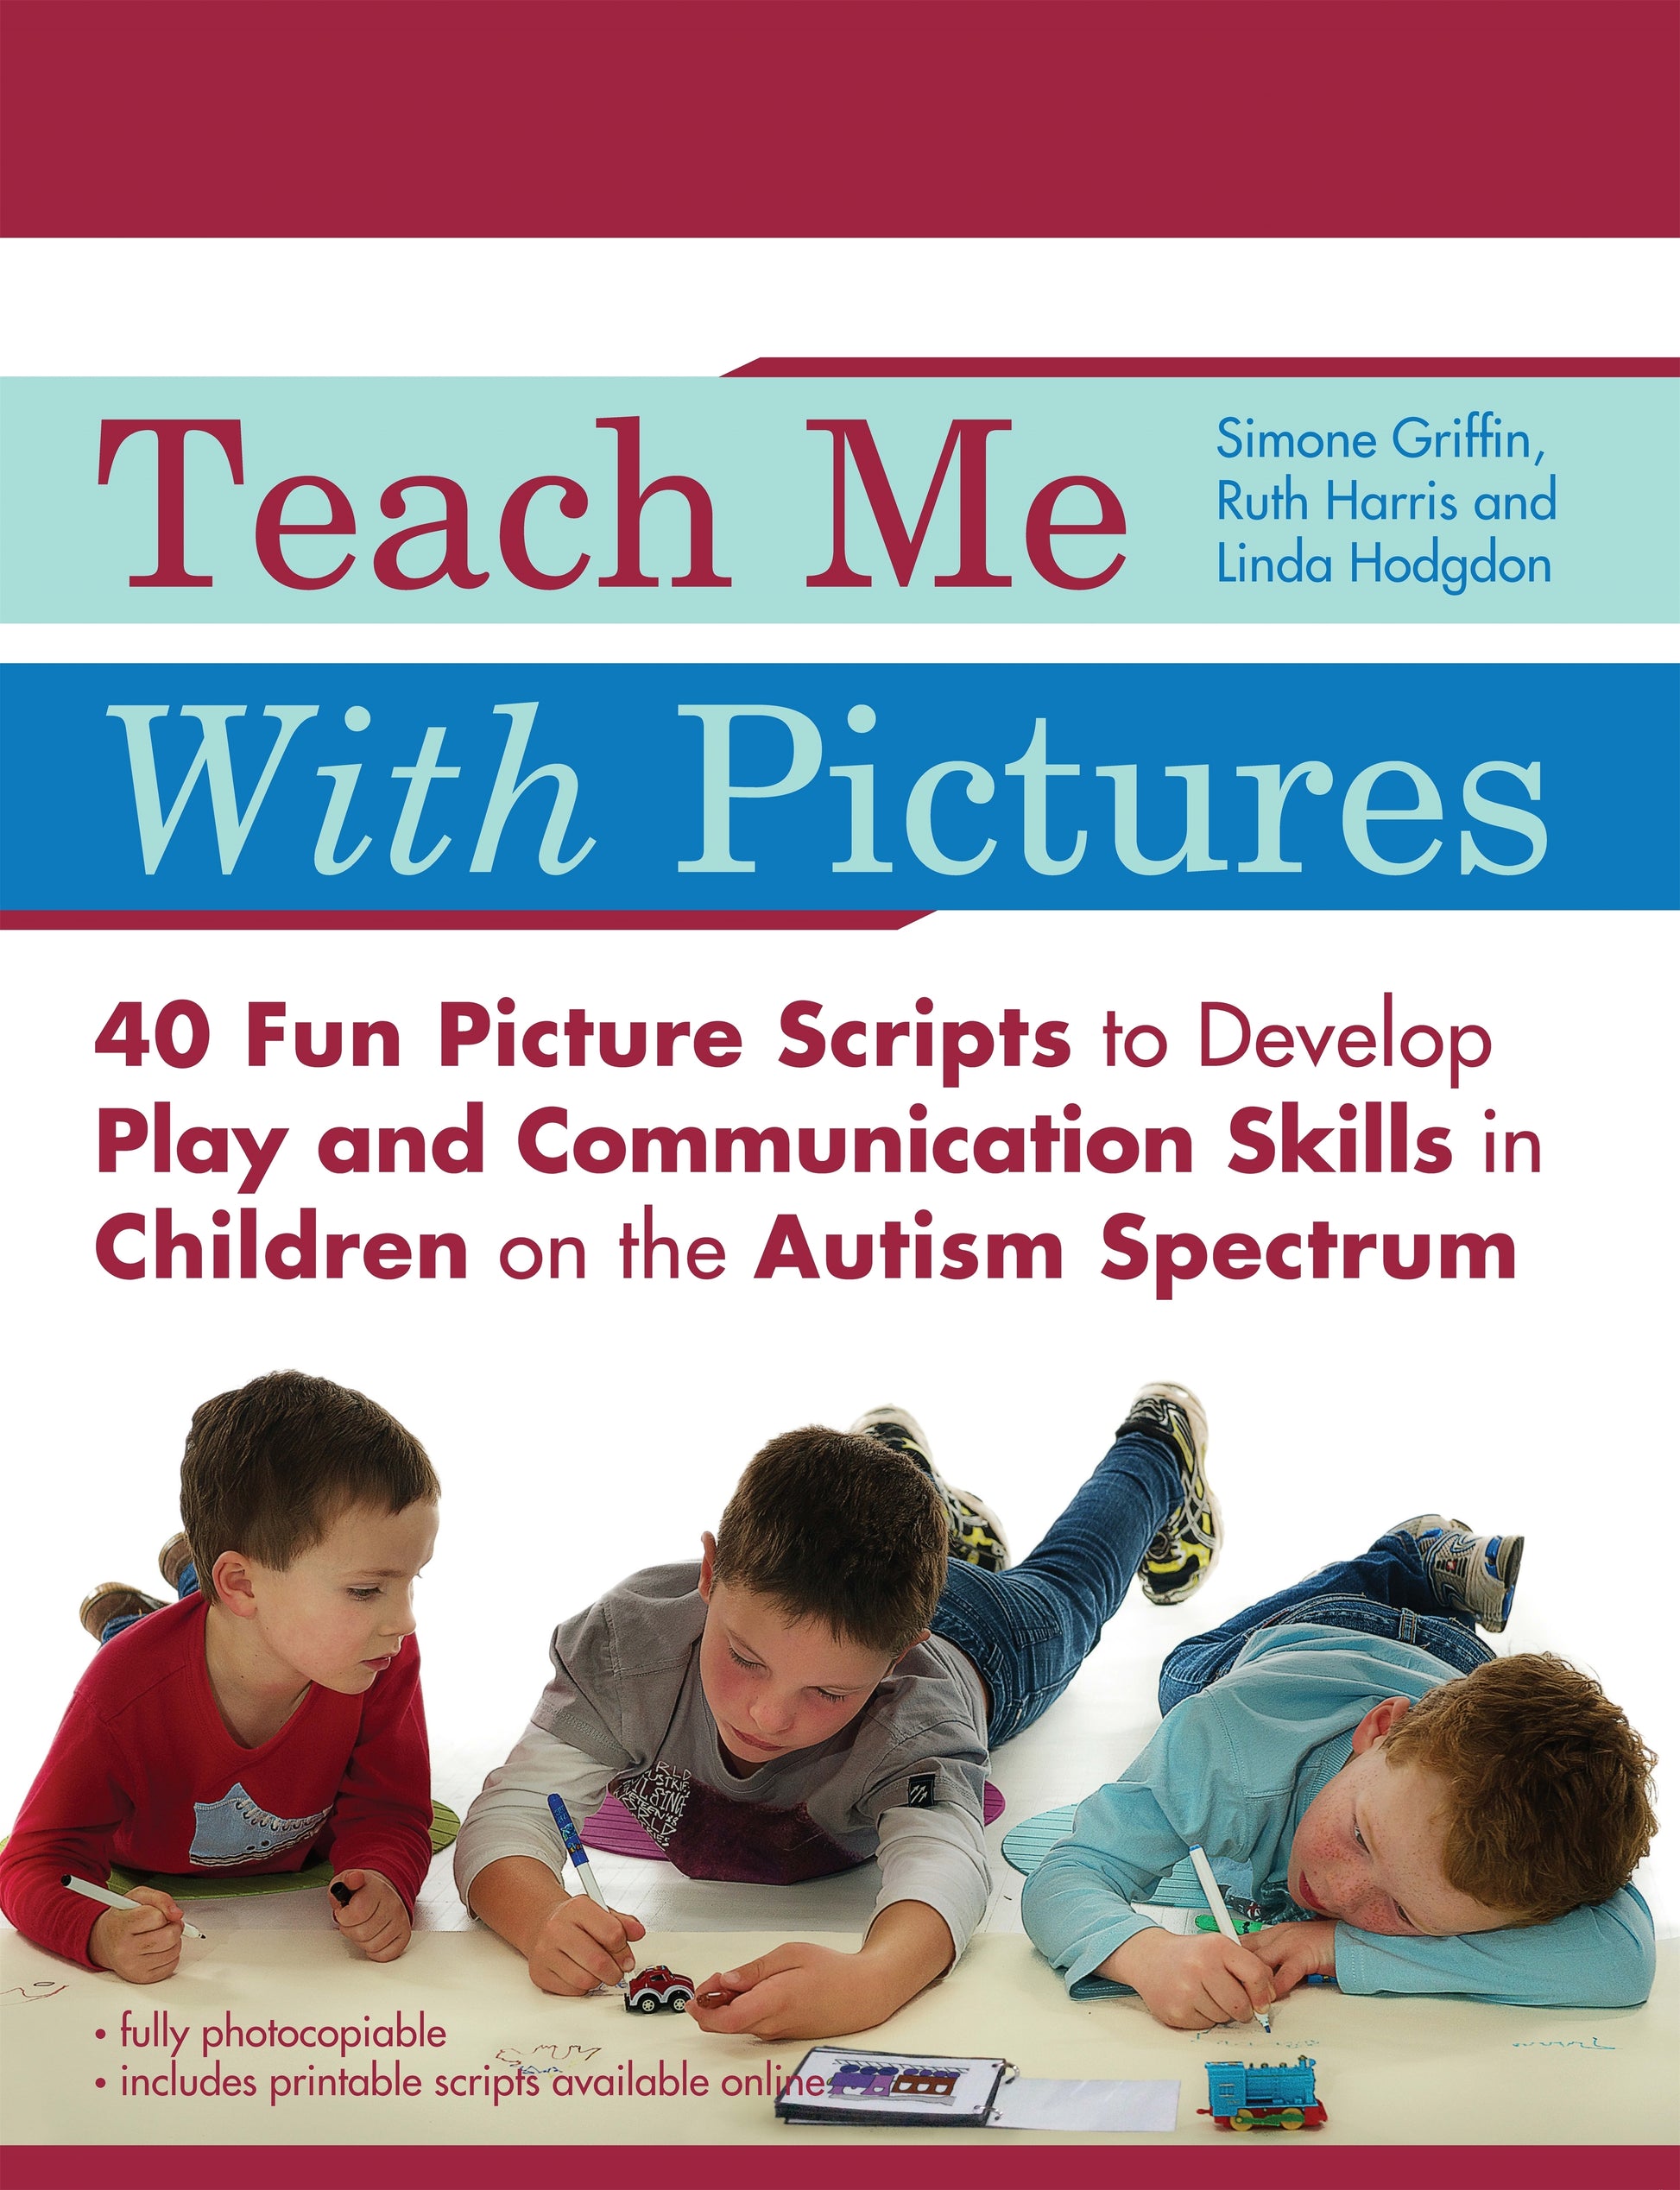 Teach Me With Pictures by Ralph Butler, Linda Hodgdon, Simone Griffin, Ruth Harris